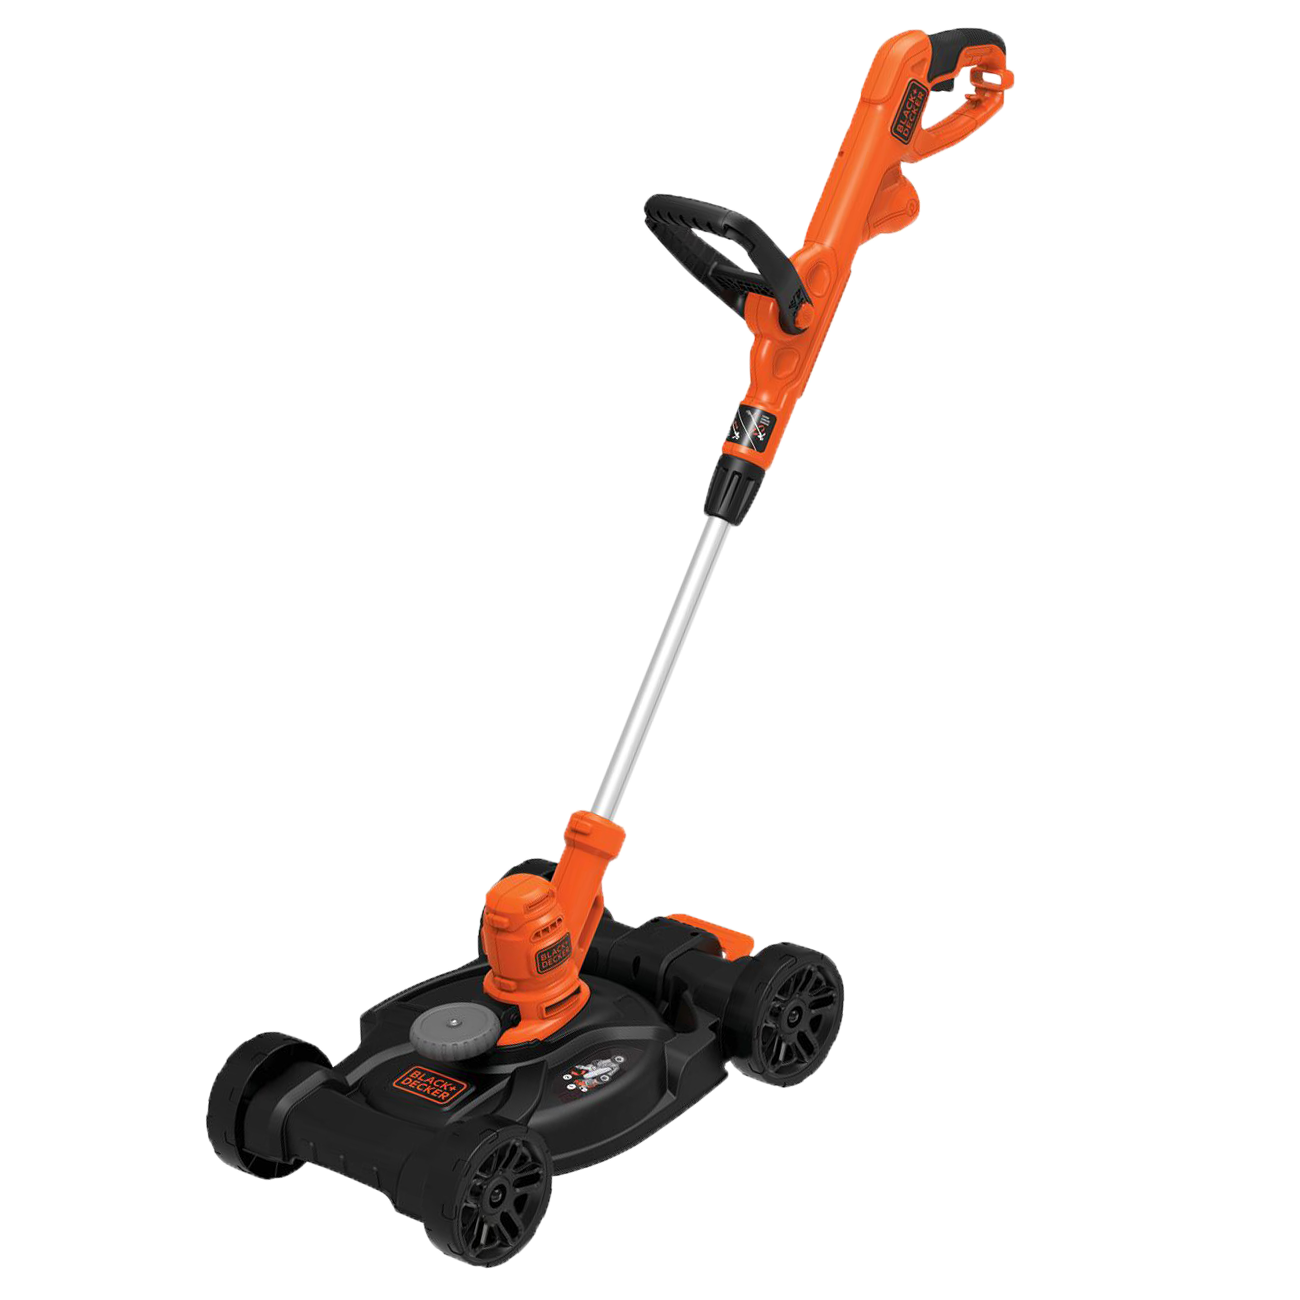 BLACK & DECKER 5.2-Amp Corded Electric String Trimmer and Edger at